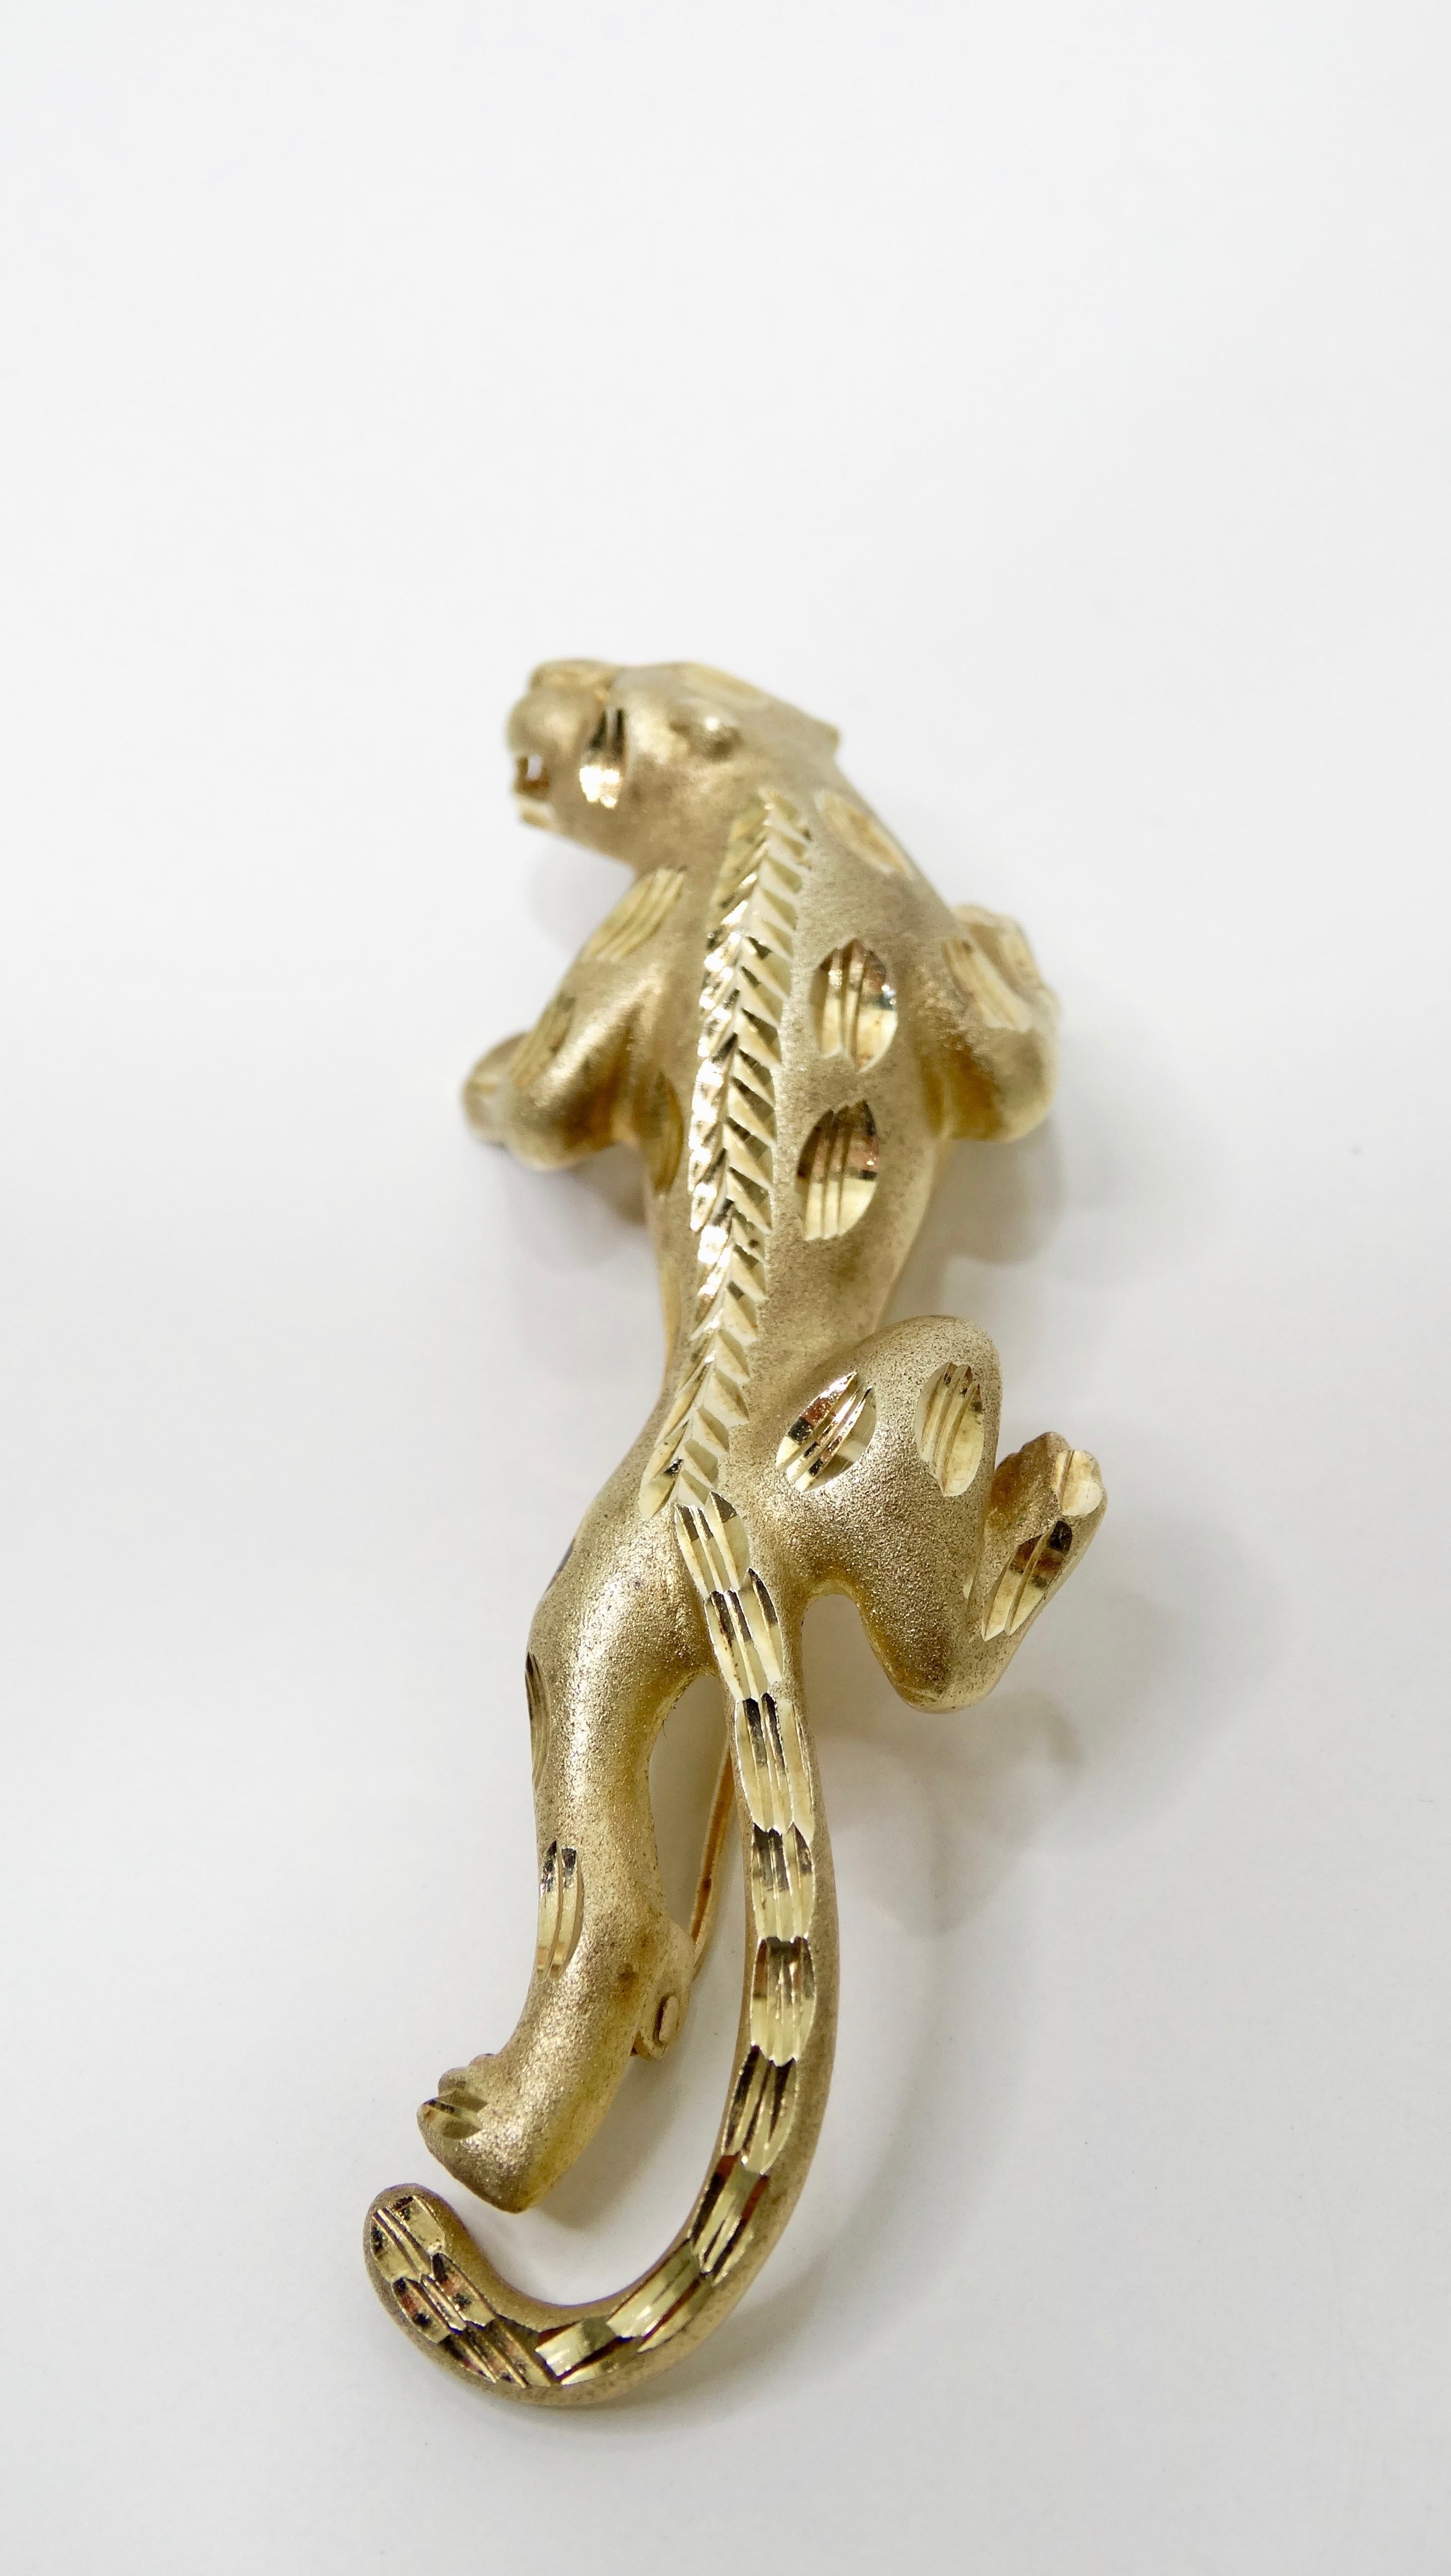 Accent your jacket with this stunning panther brooch! Circa late 20th century, this chic 14k Yellow Gold brooch is in the shape of a crawling panther with cut out details. Stamped 14k under pin. Timeless and versatile, this brooch can be worn with